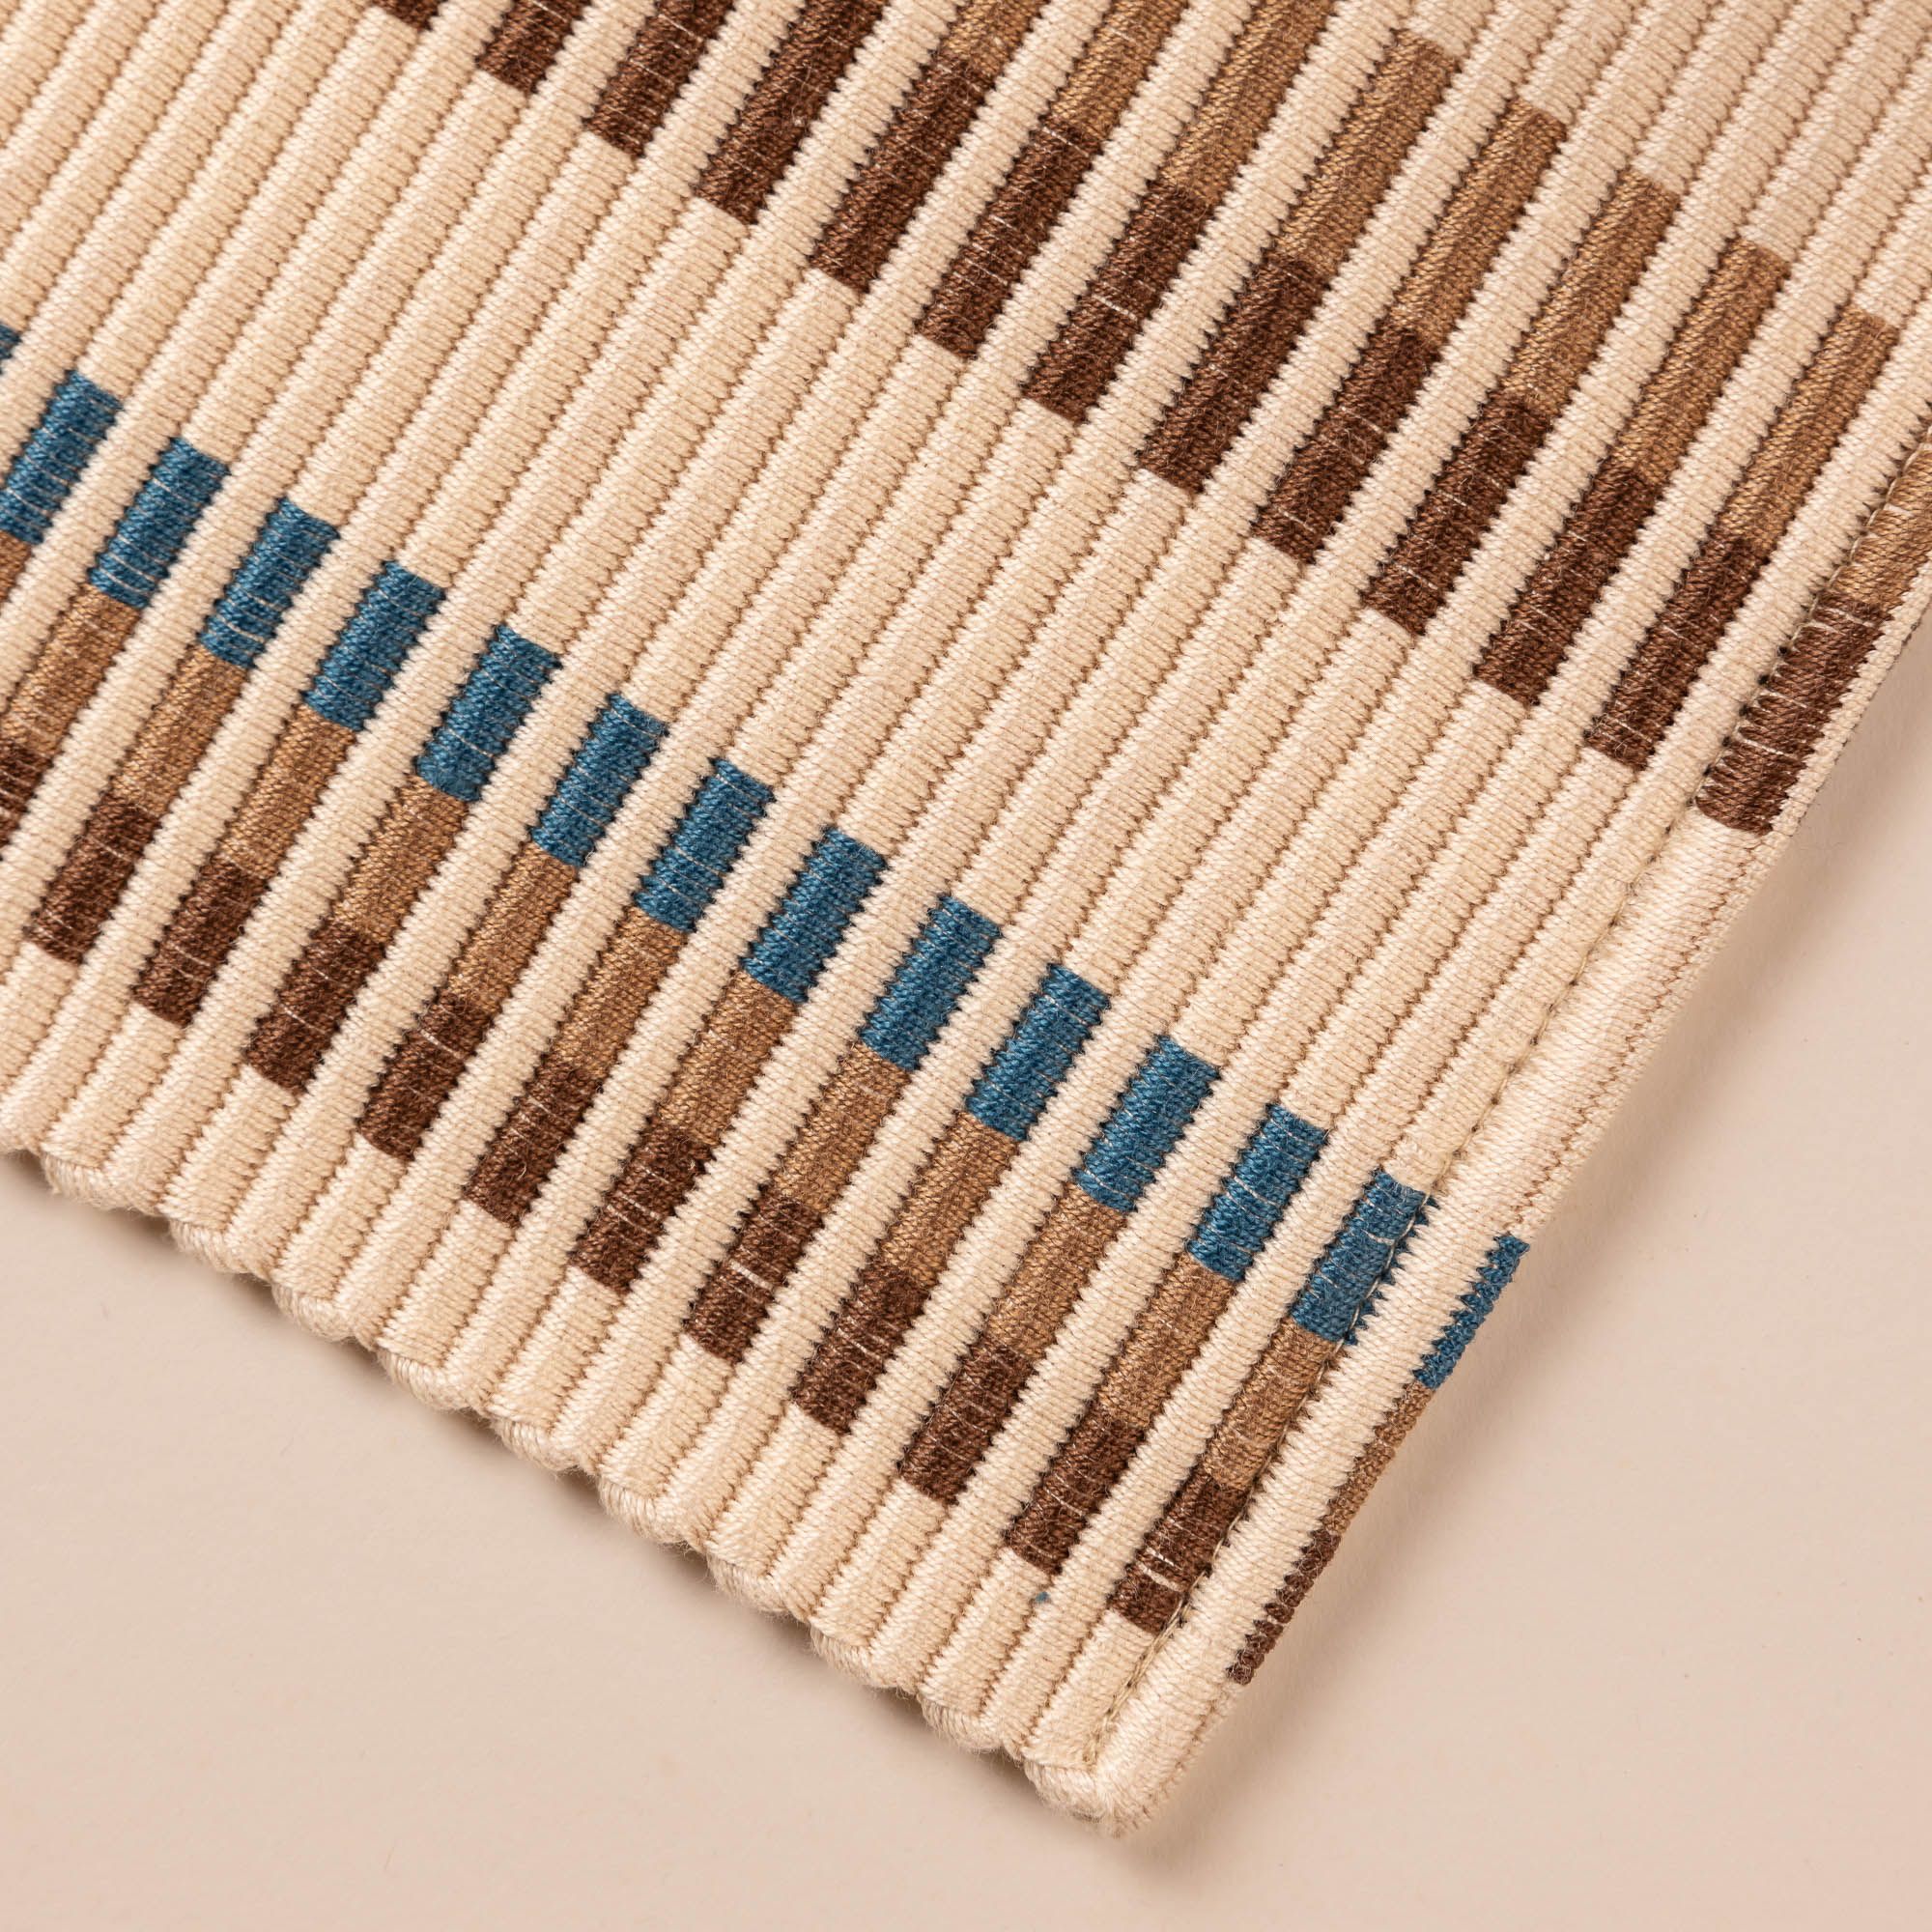 Closeup look at the corner of a rectangle placemat with offset stripe design that is hand woven in cream, brown, tan, and blue colors